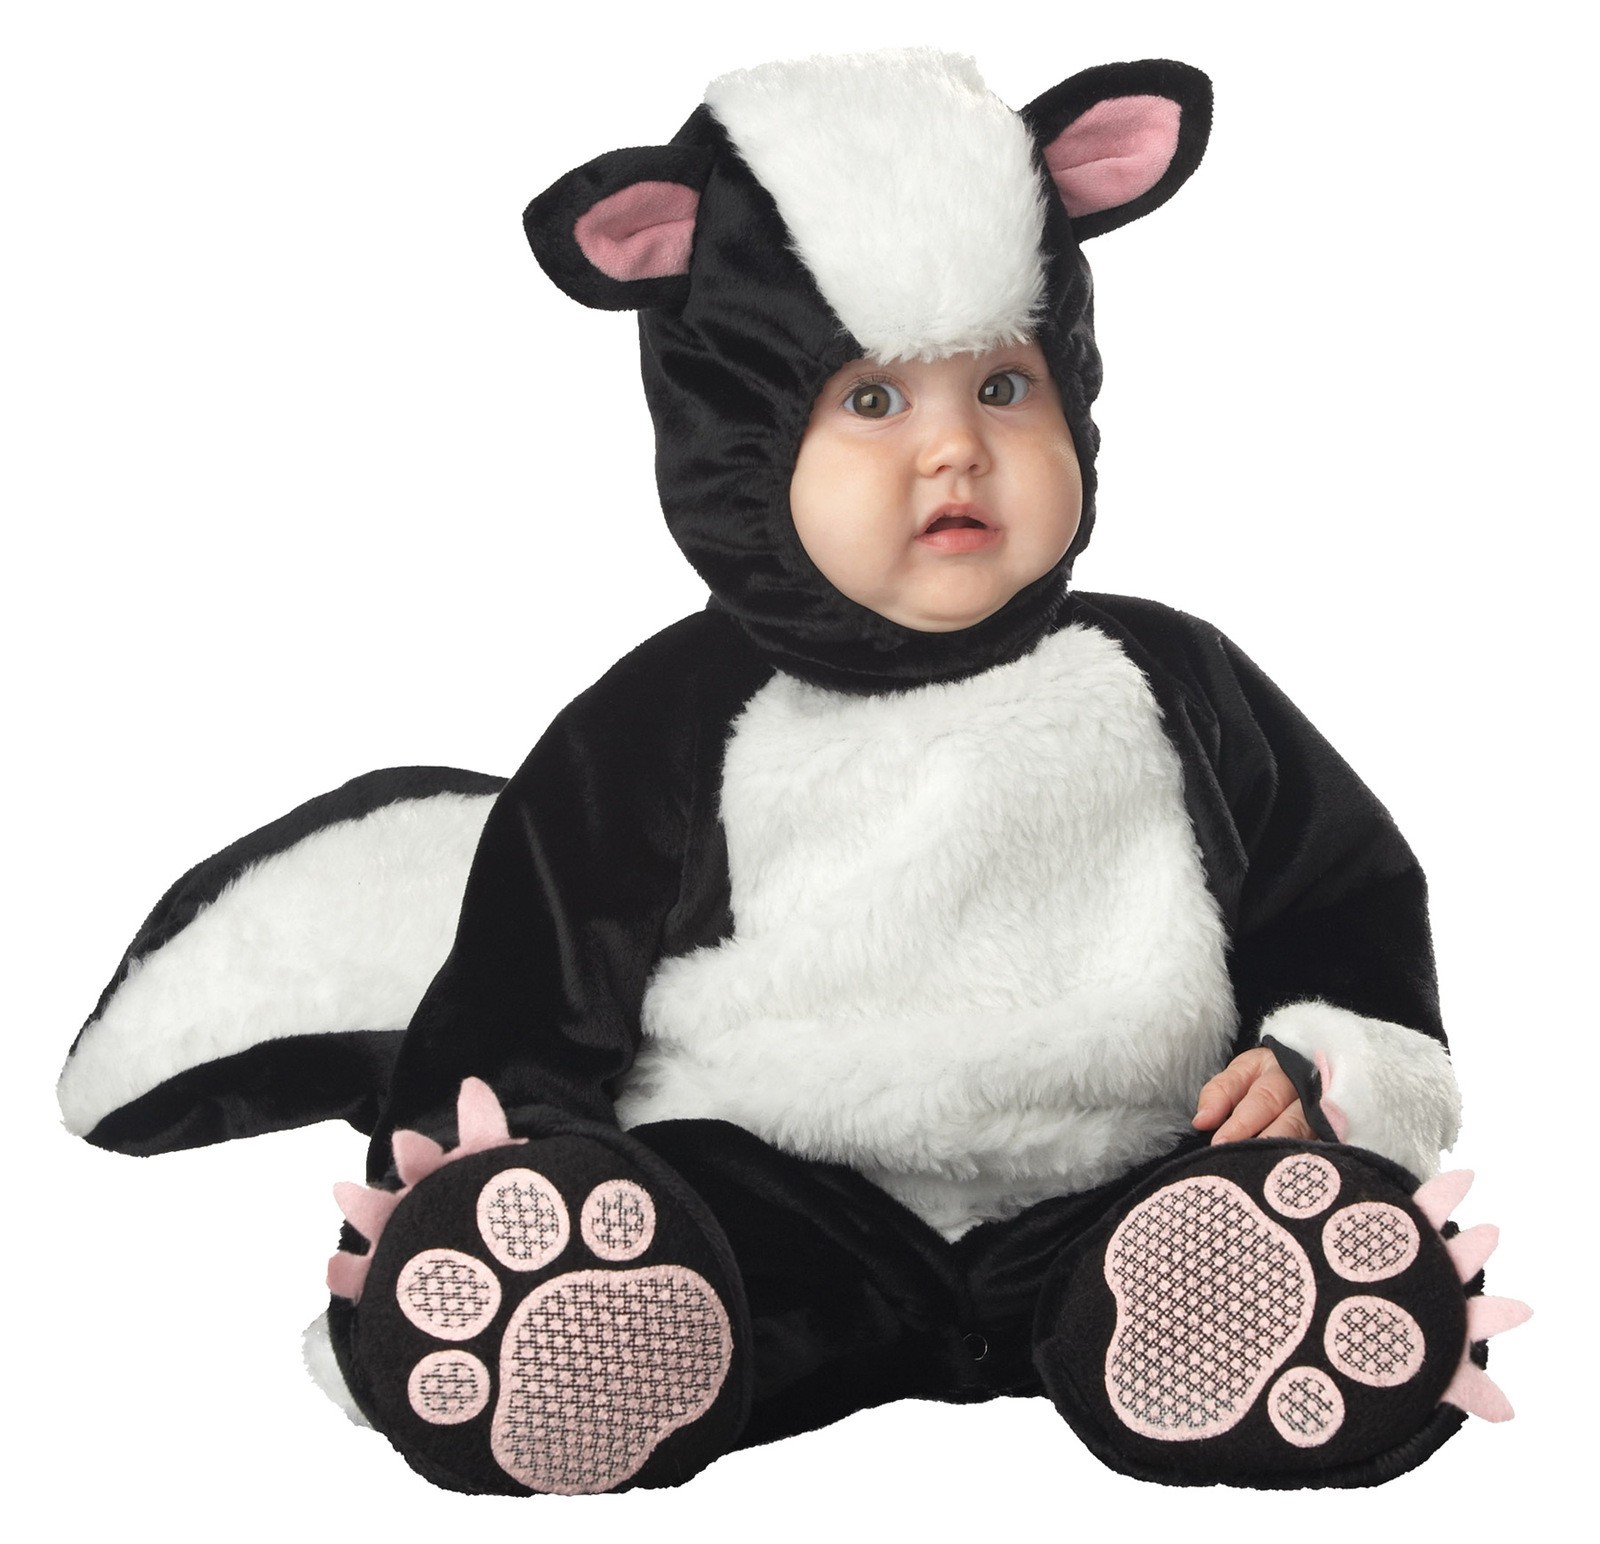 Primary image for Lil' Stinker Baby Infant Costume - Infant Small